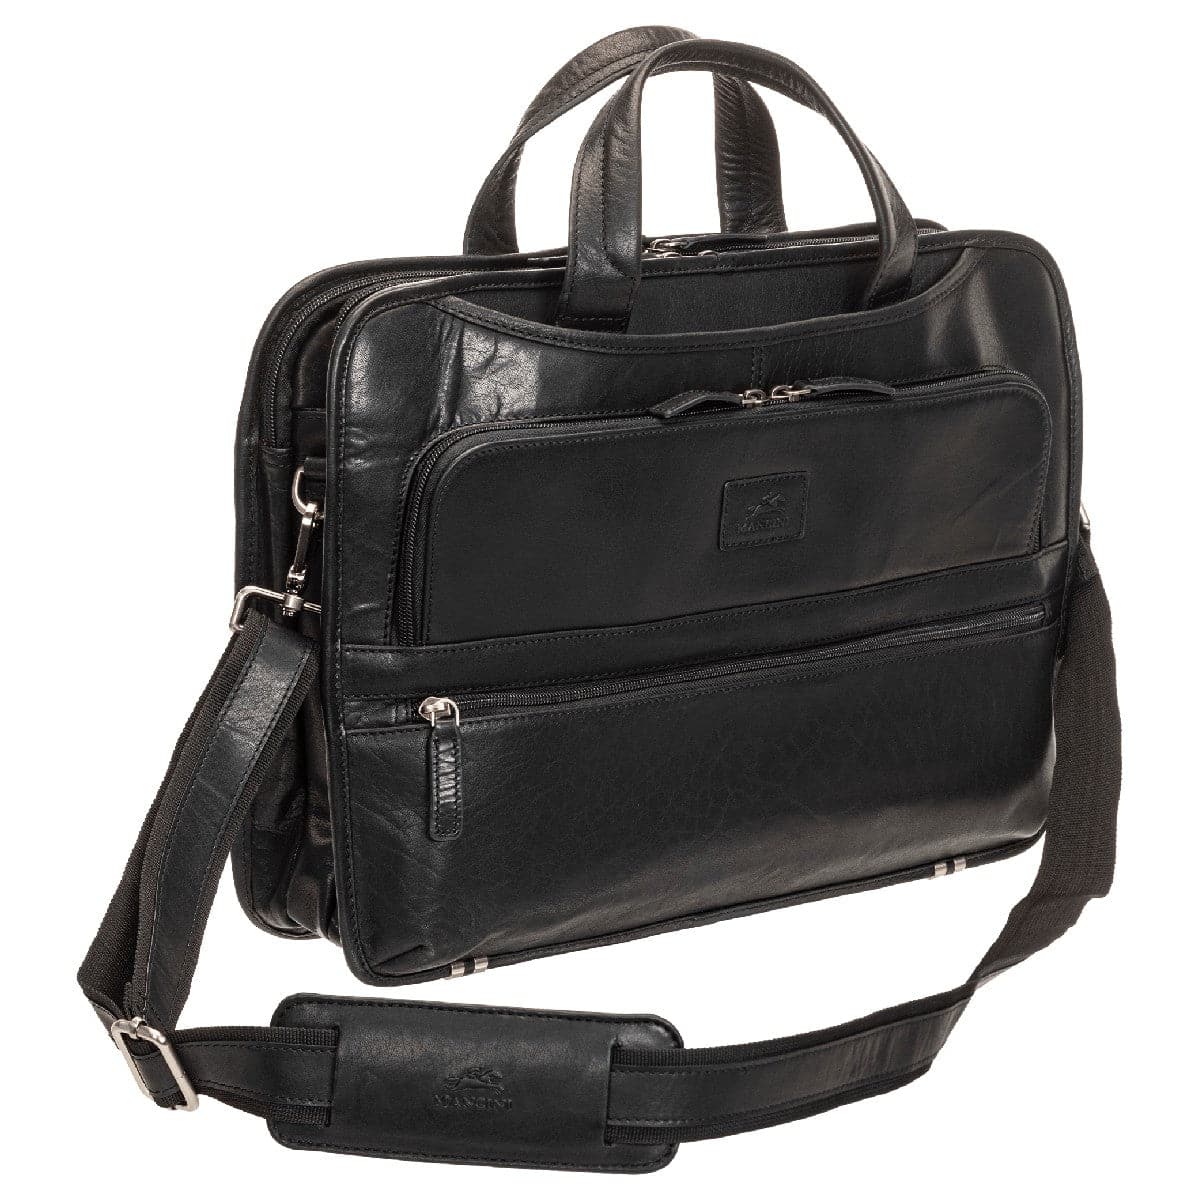 Mancini Buffalo Triple Compartment Briefcase for 15.6" Laptop / Tablet